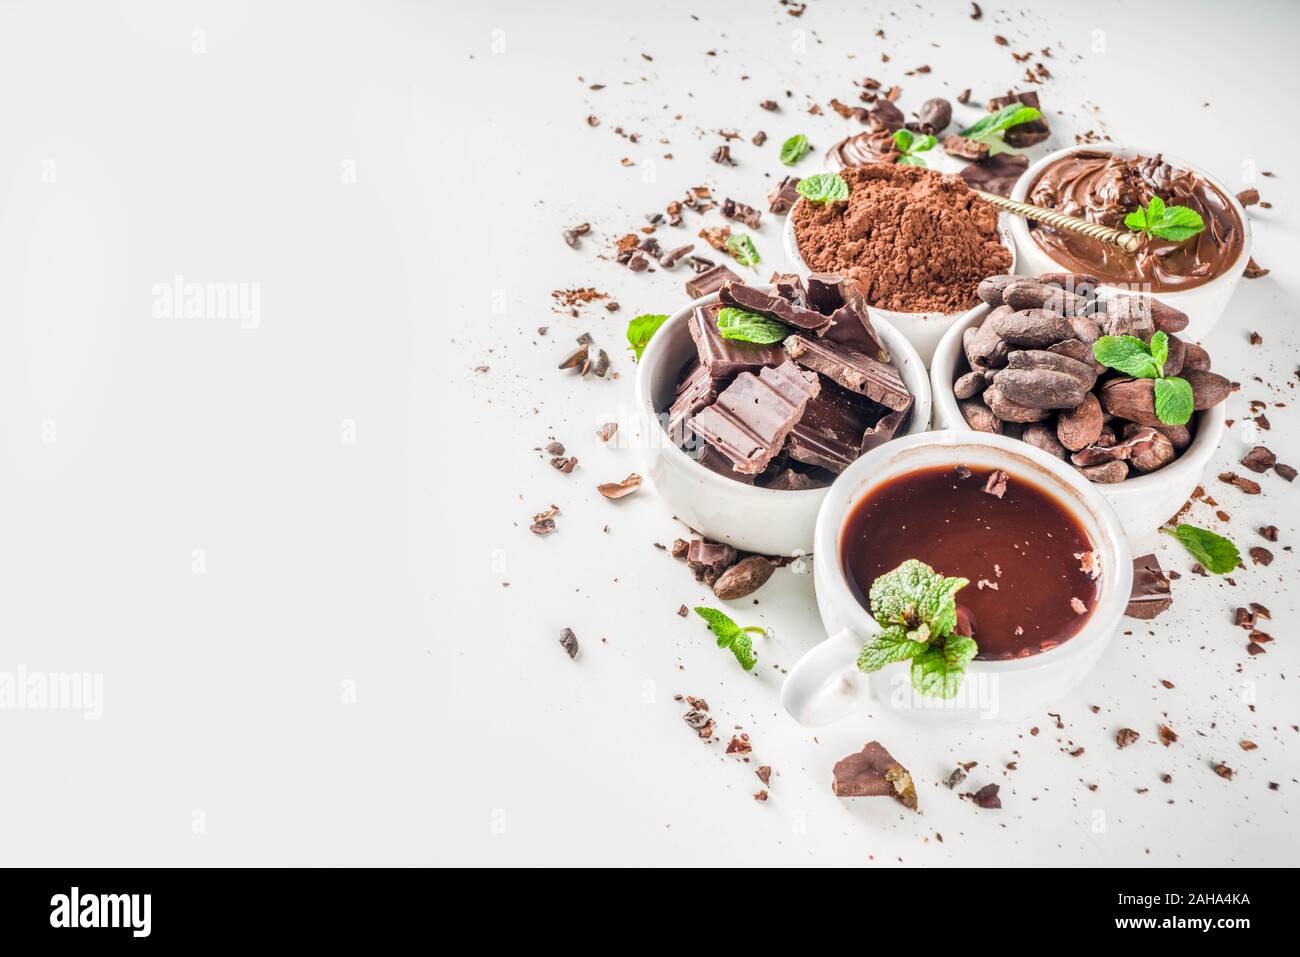 Different conditions of cocoa. Various cocoa - beans, beans, ground, crushed cocoa powder, chocolate paste, chocolate pieces and hot chocolate in a cu Stock Photo